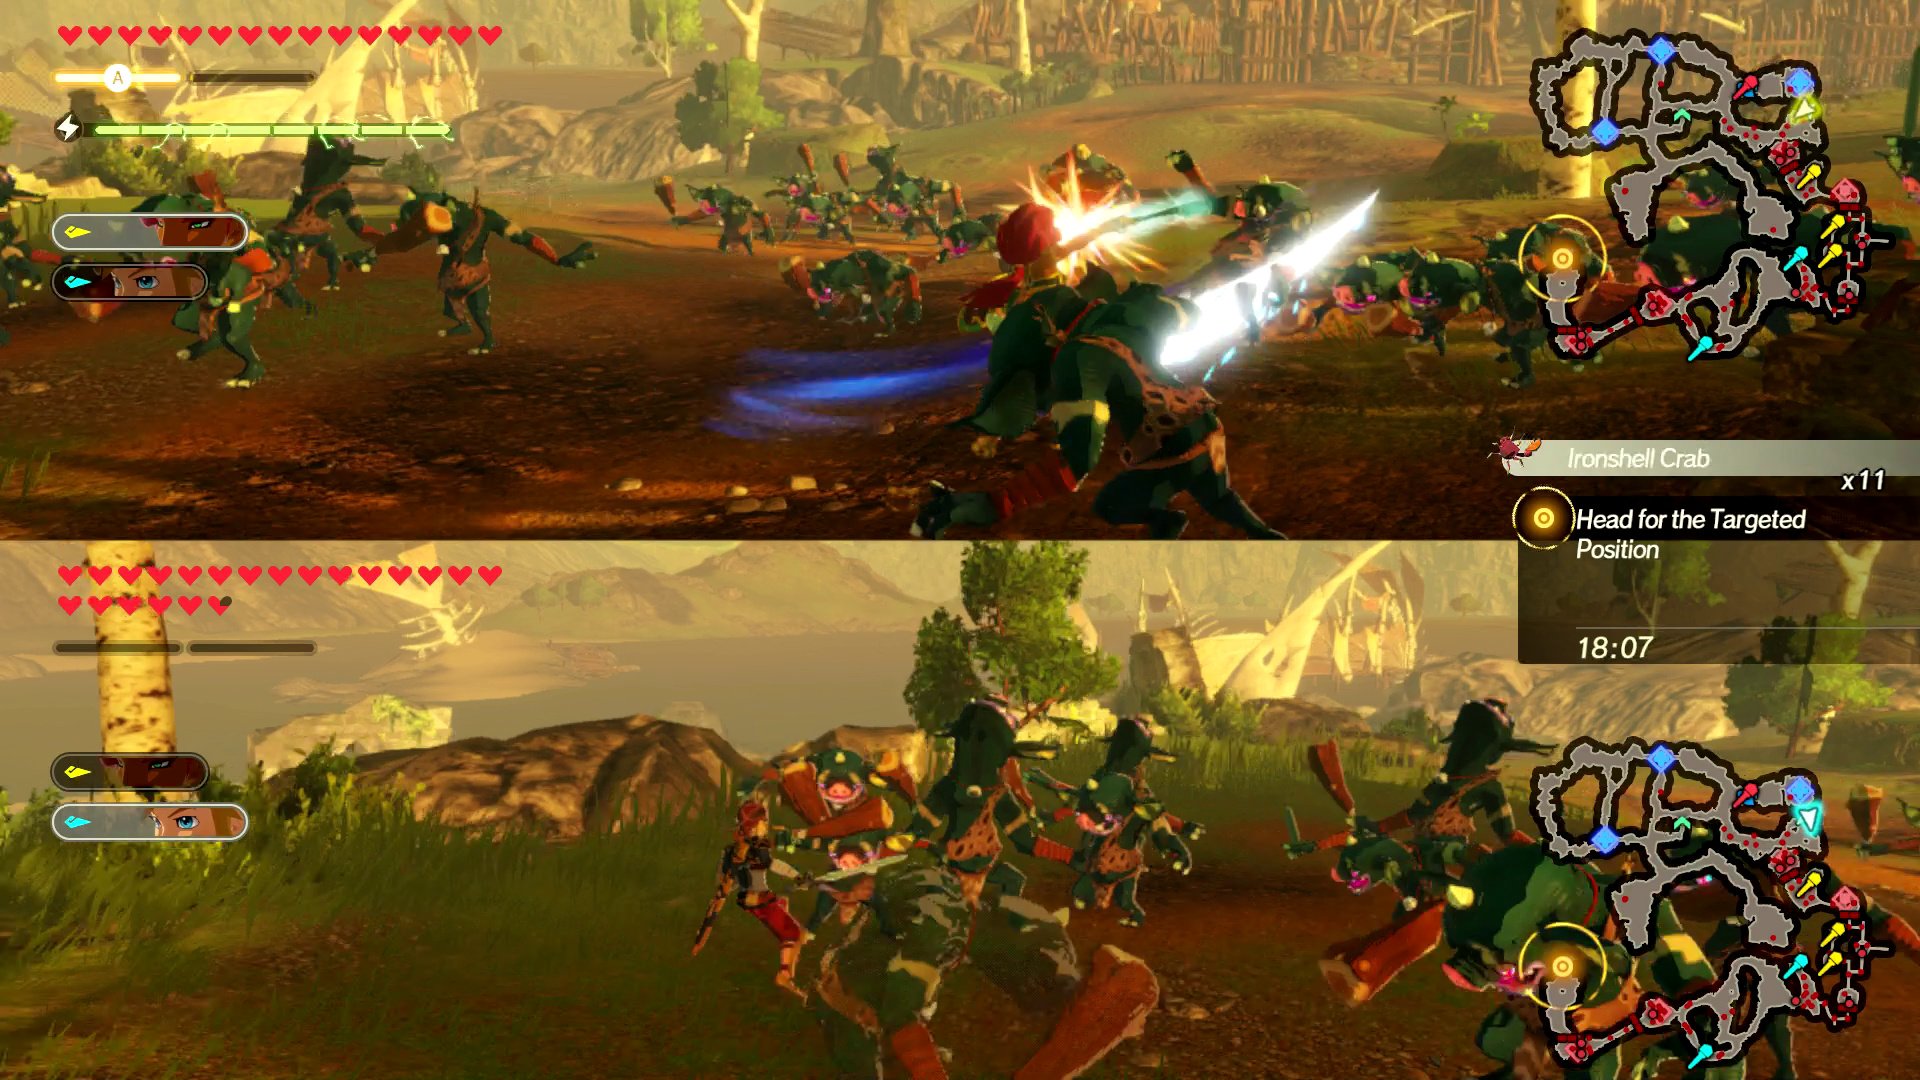 hyrule warriors switch online multiplayer